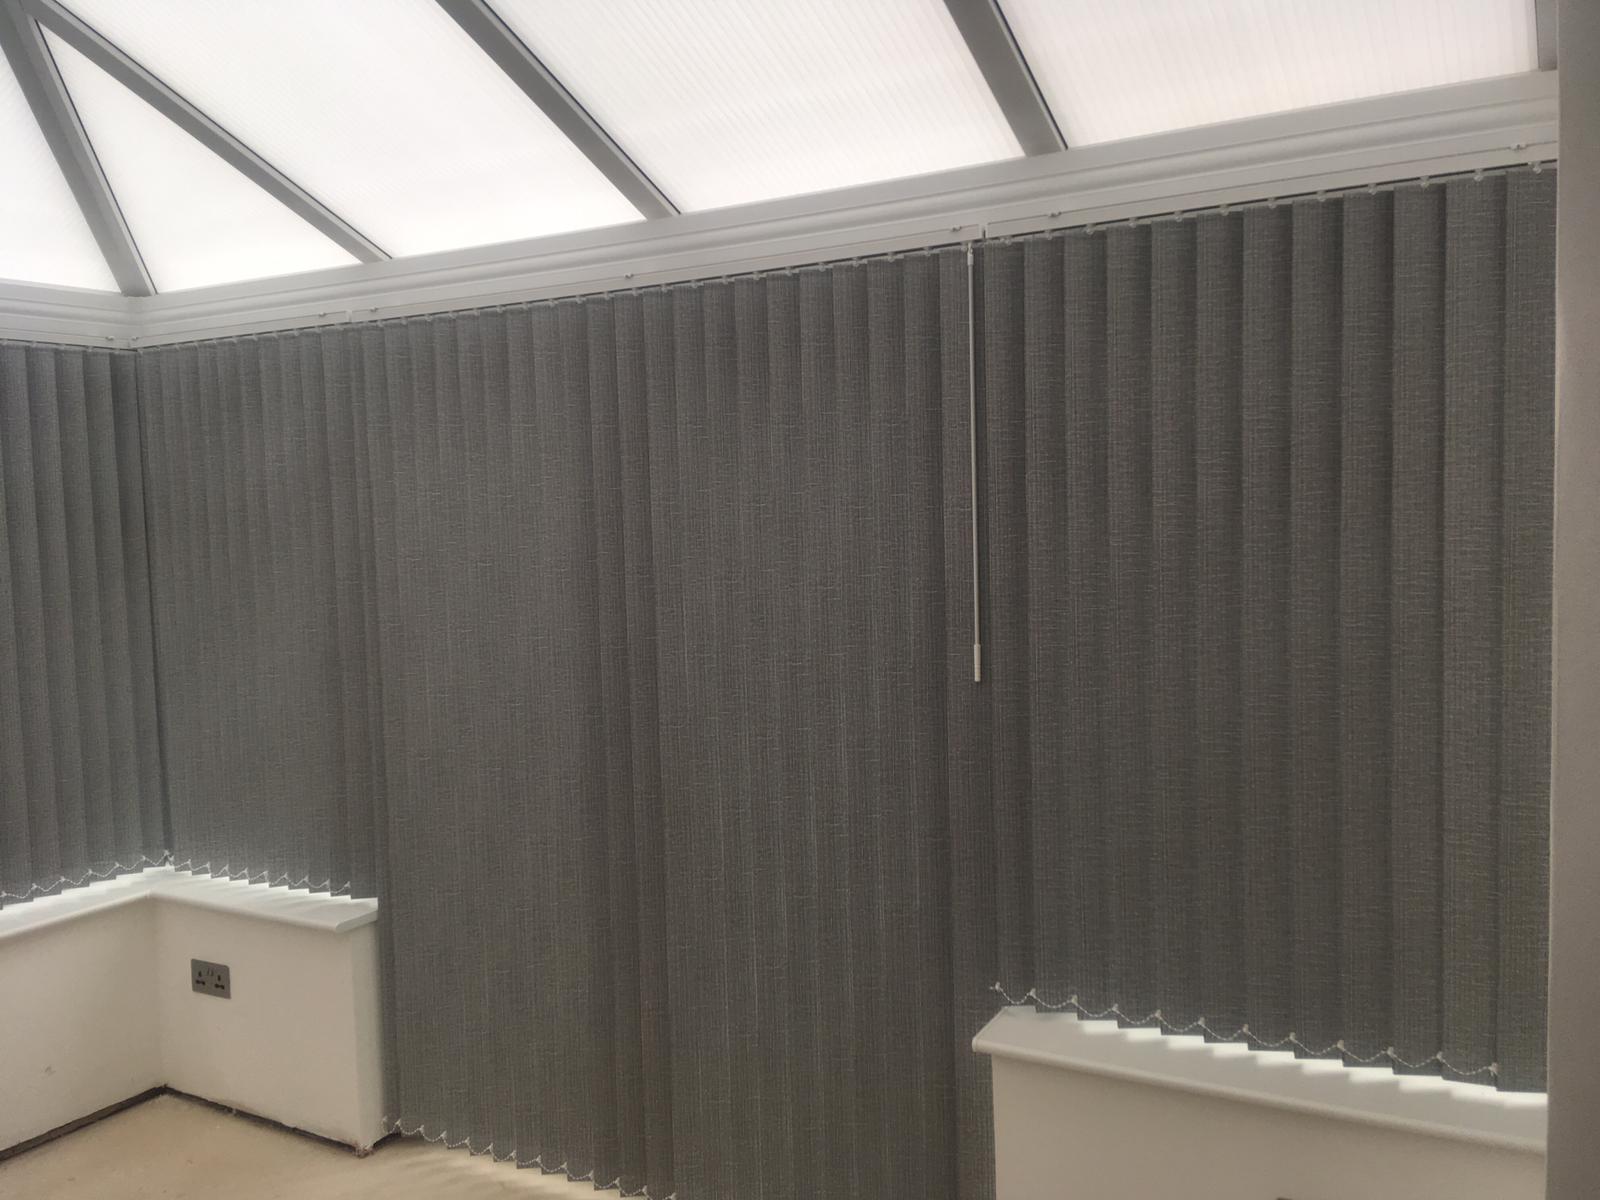 Suppliers of Curved Rail Vertical Blinds For Bay Windows